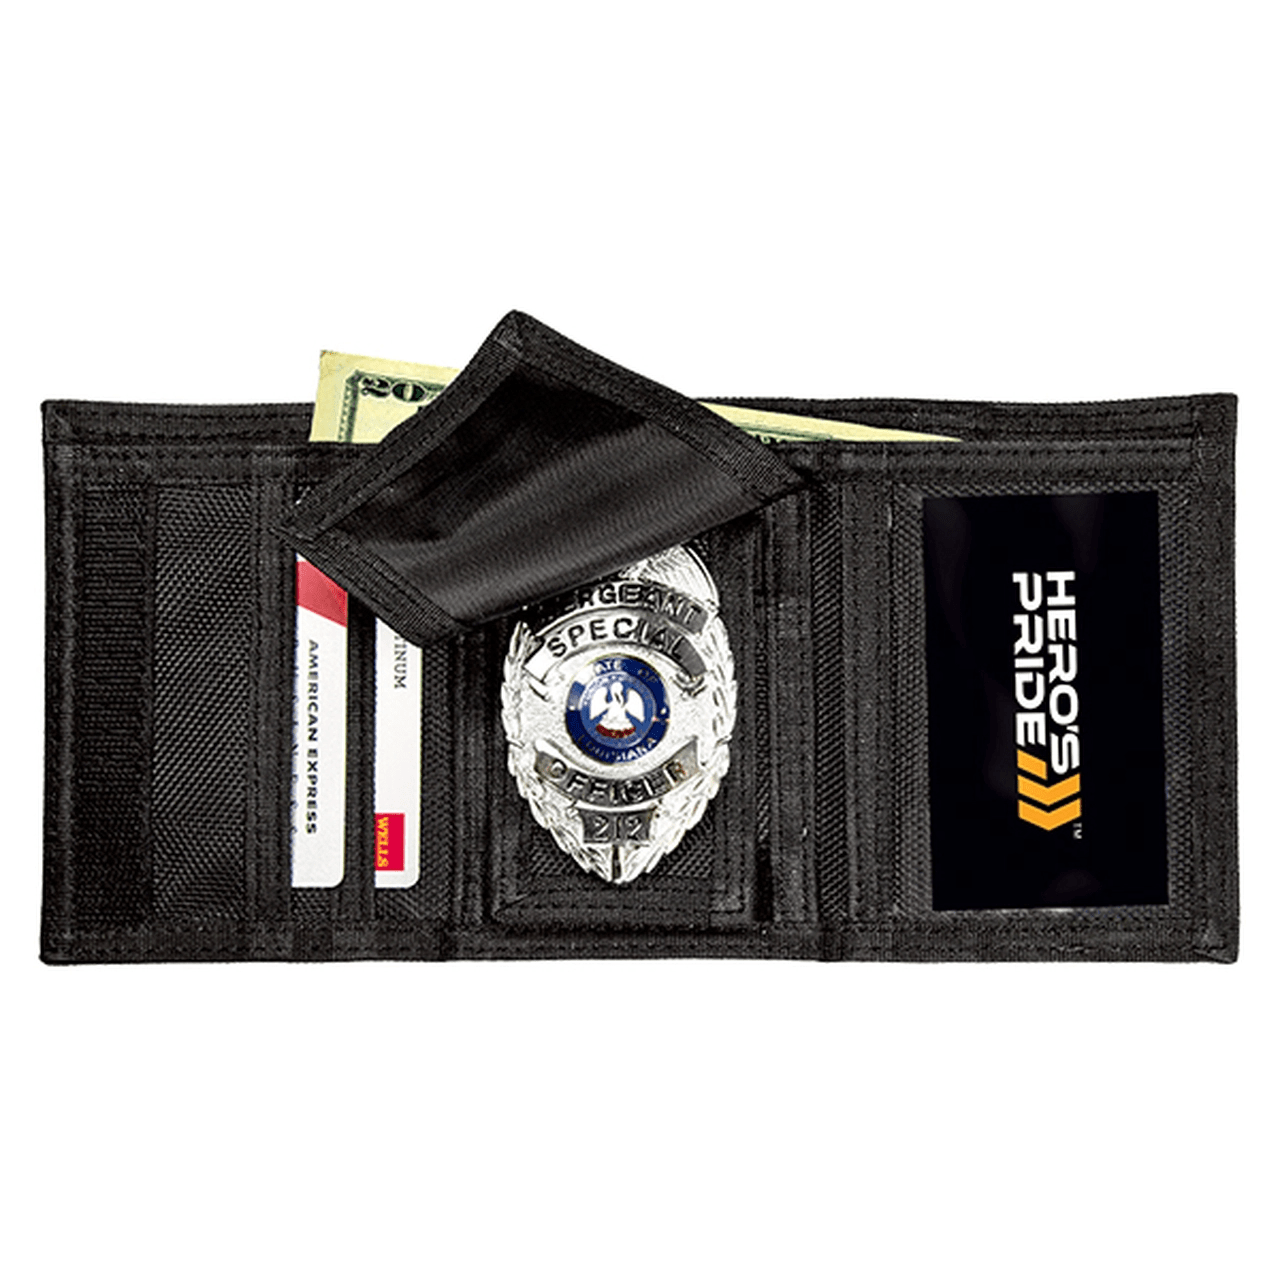 Hero's Pride Deluxe Ballistic Tri-Fold Wallet with Removable Badge Holder 9160U - Tactical & Duty Gear